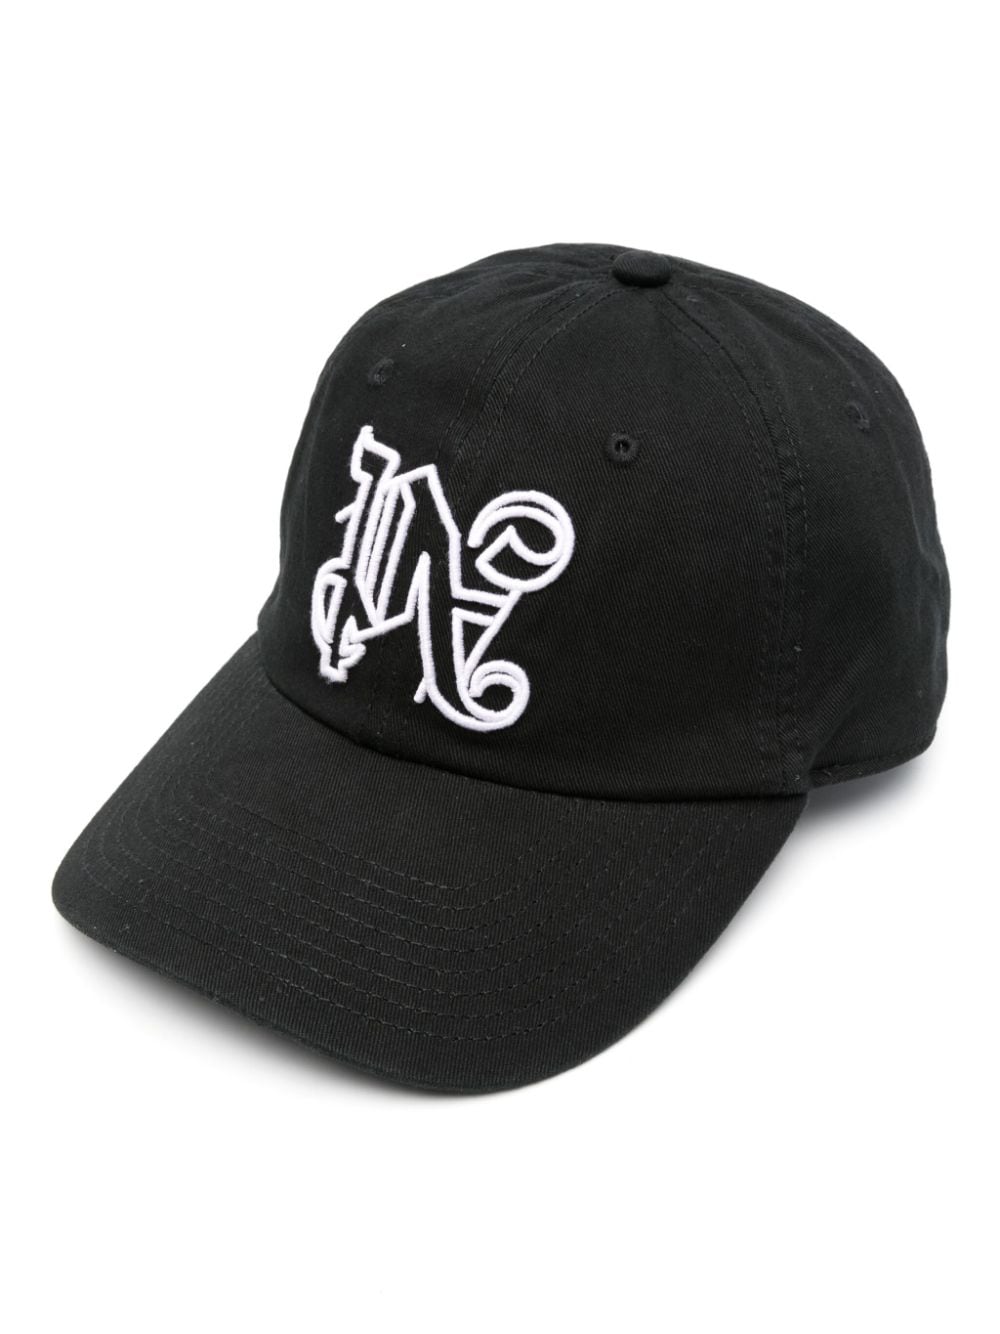 Embroidered logo to the front cap